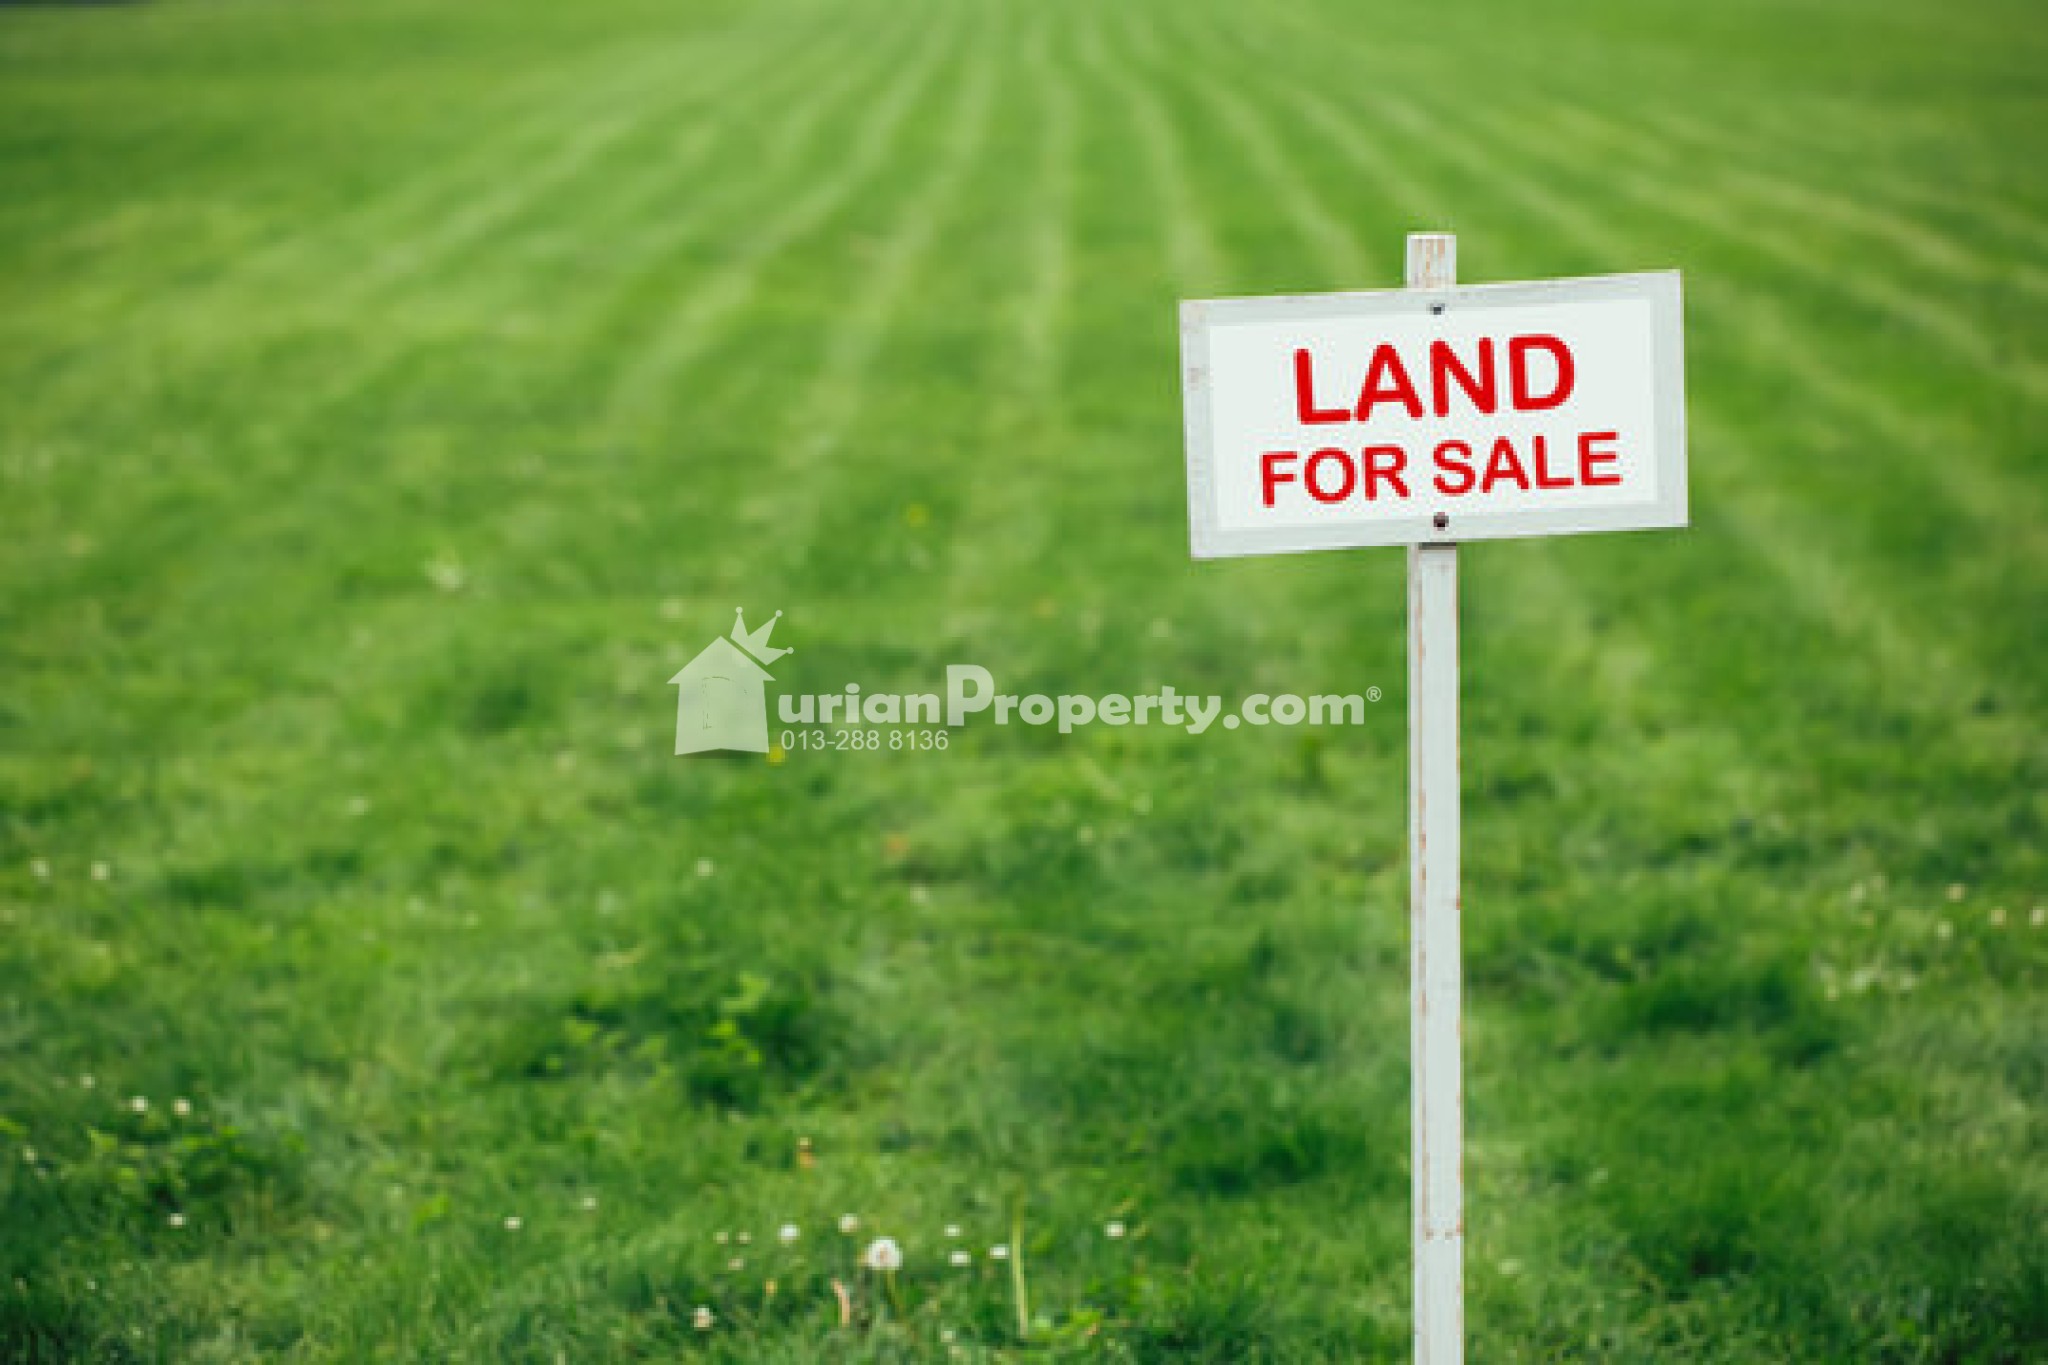 Agriculture Land For Sale at Hulu Langat